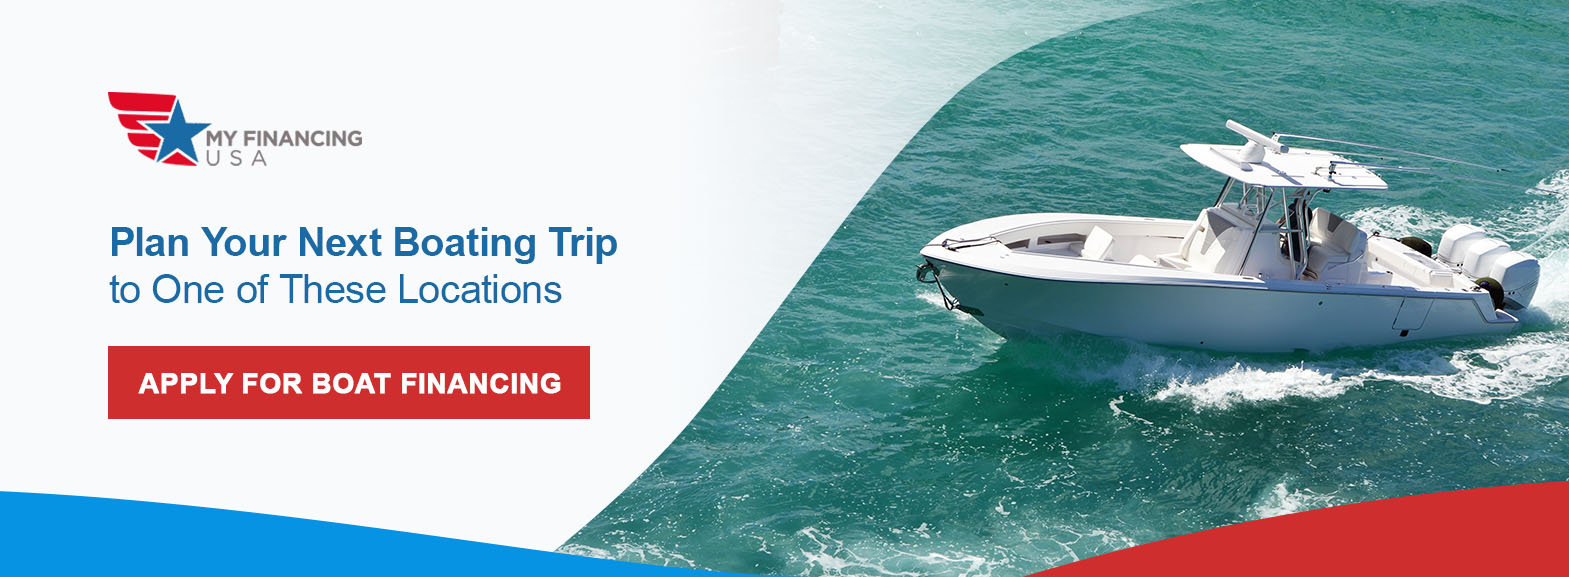 Plan Your Next Boating Trip to One of These Locations - Apply for boat financing!